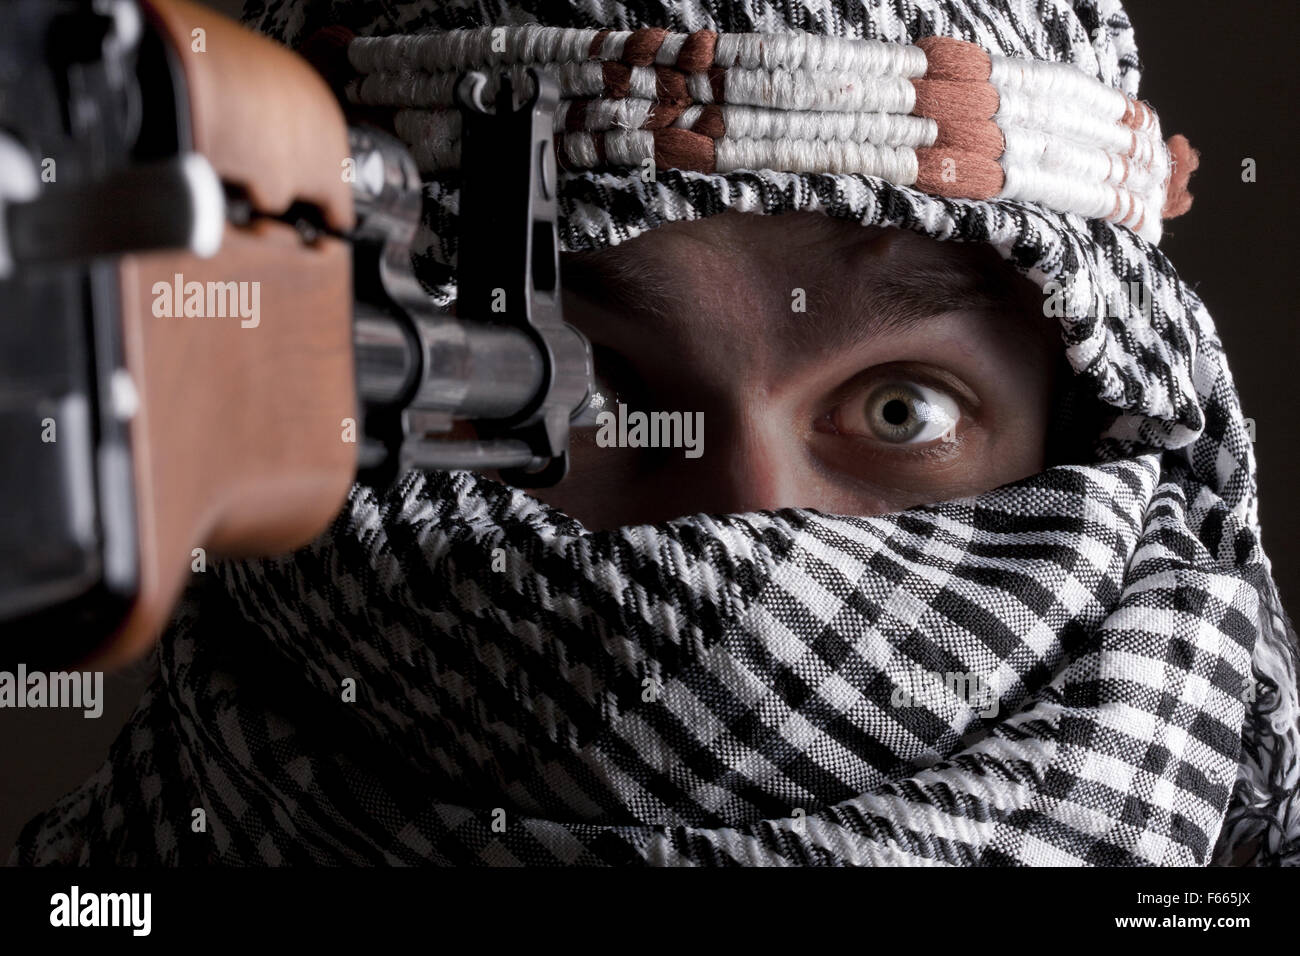 Portrait of scared aimed middle eastern man Stock Photo